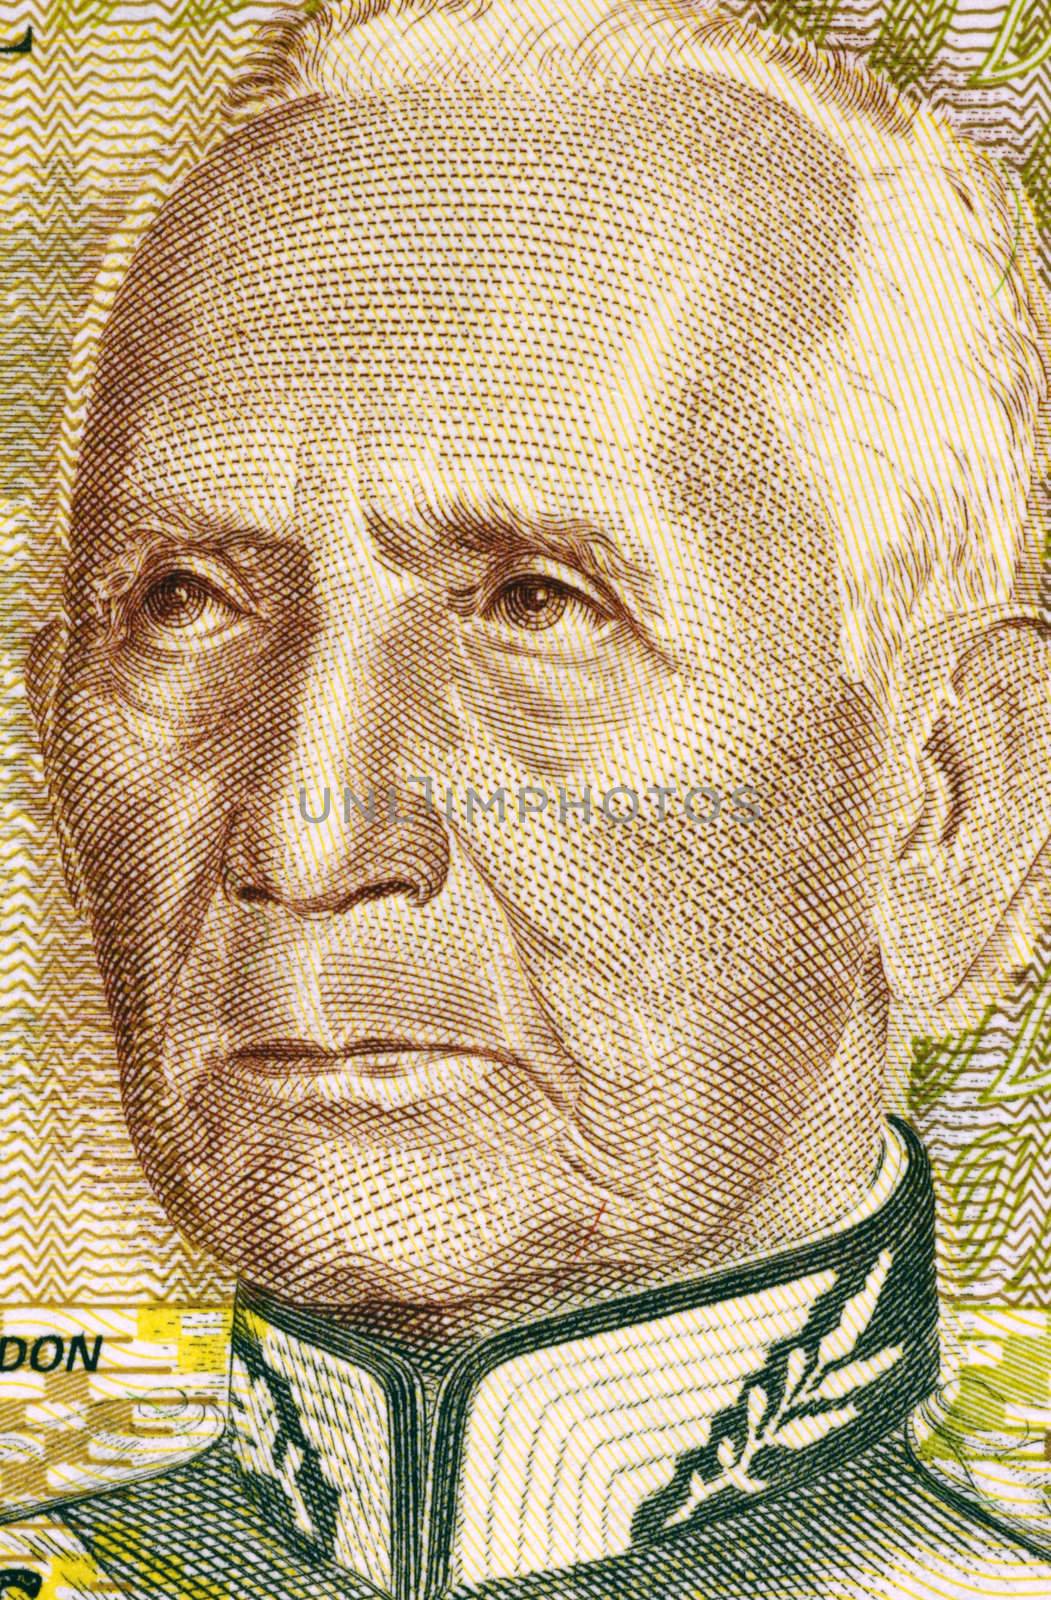 Candido Rondon (1865-1958) on 1000 Cruzeiros 1990 Banknote from Brazil. Brazilian military officer best known for his exploration of Mato Grosso and the Western Amazon Basin. Also for his lifelong support of Brazilian indigenous populations.